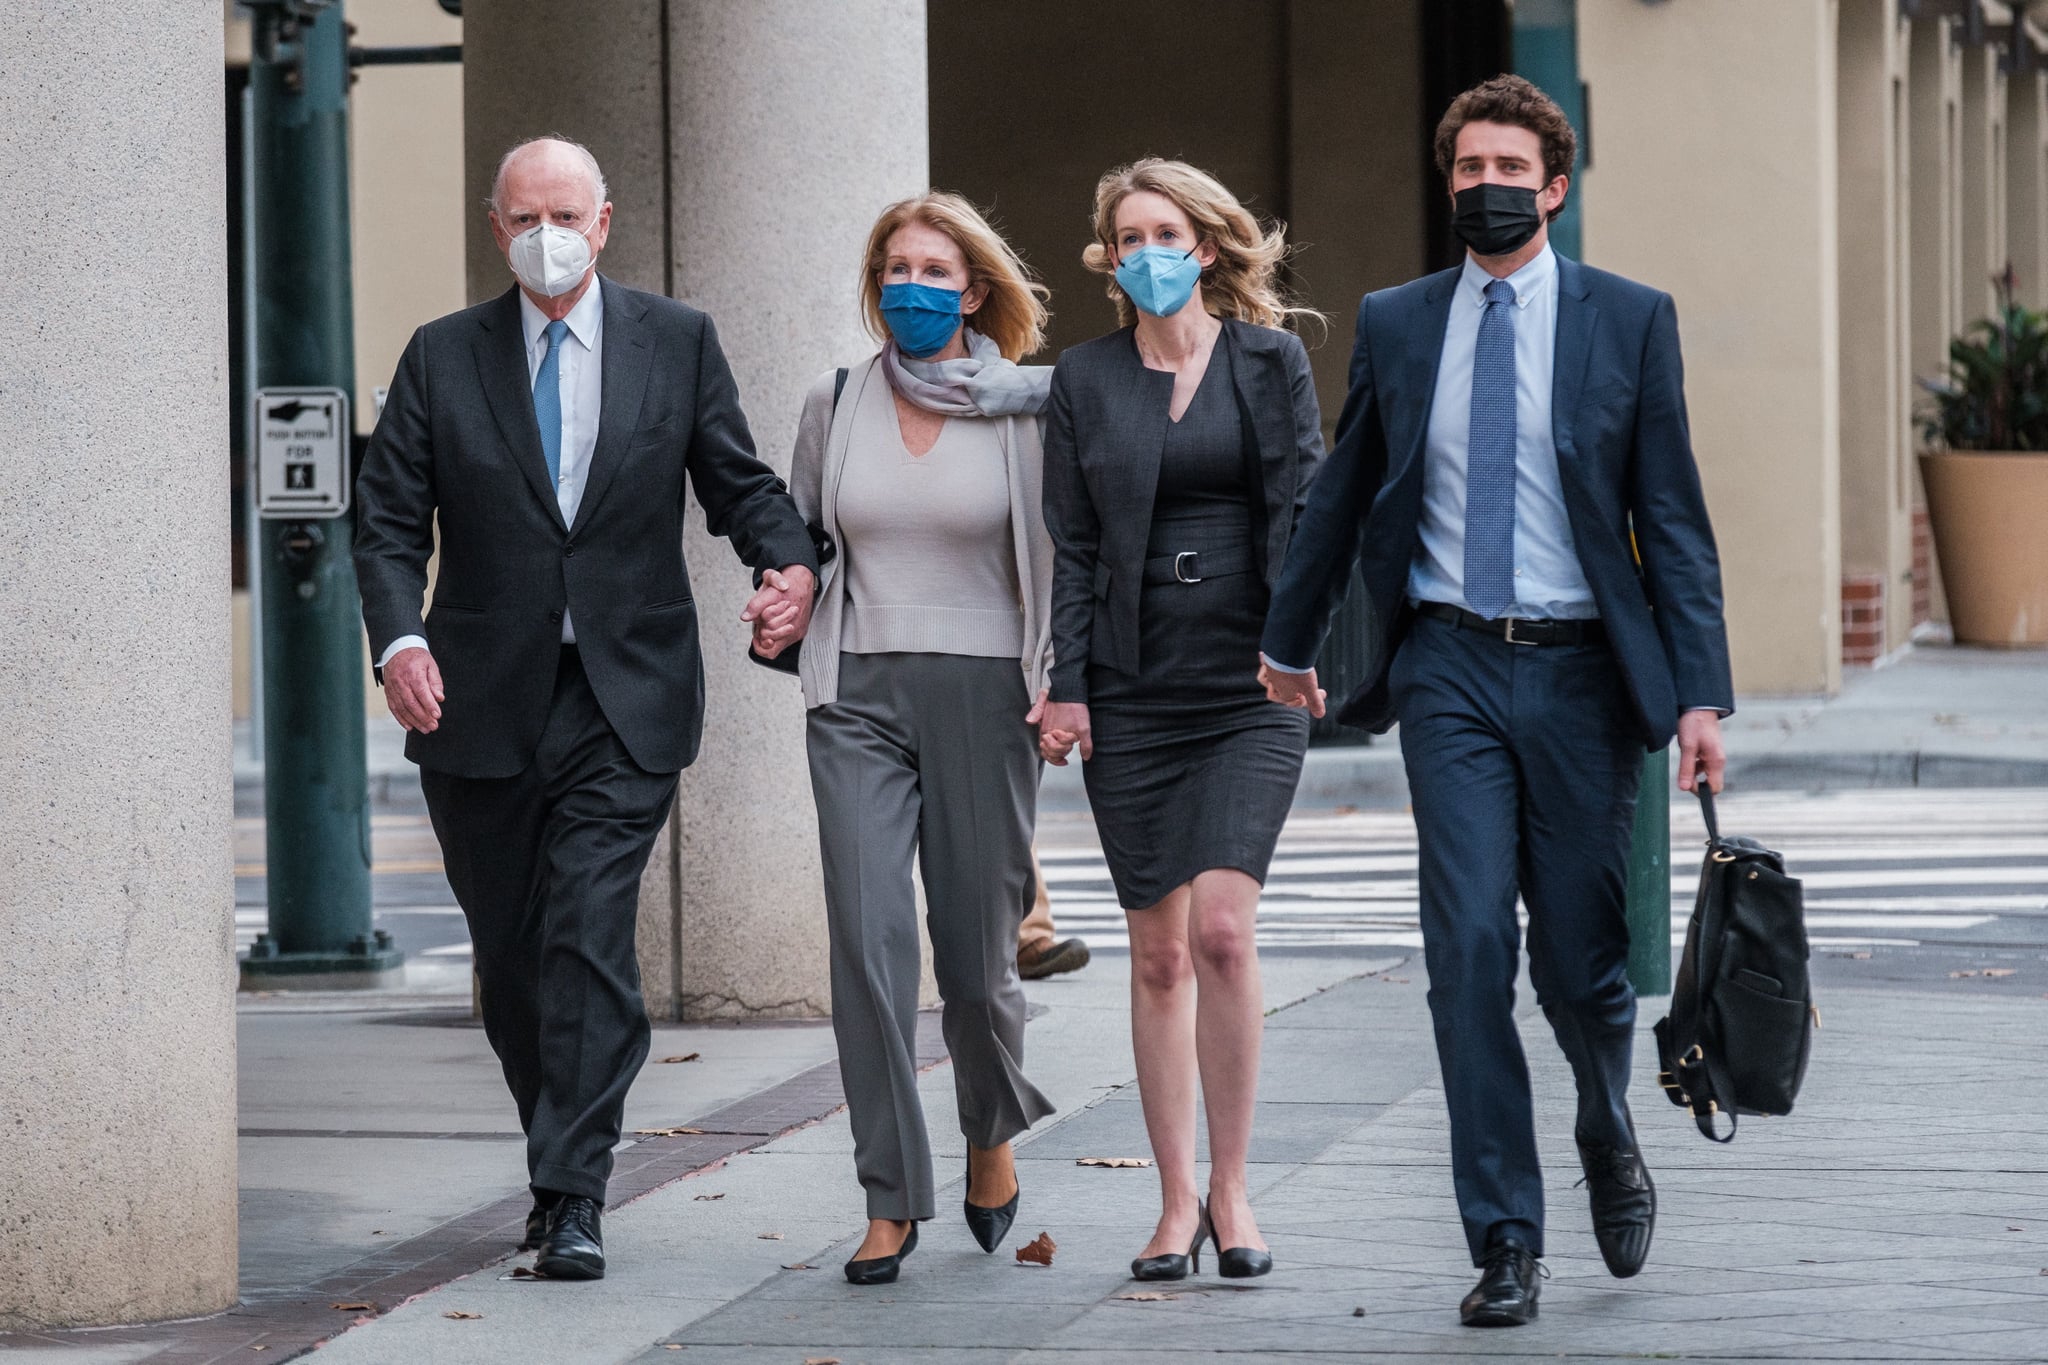 Elizabeth Holmes (2R) walks with her partner Billy Evans (R) and her parents Christian (L) and Noel (2L) Holmes, to the federal court to hear the verdict in her fraud trial in San Jose, California, January 3, 2022. - Fallen US biotech star Elizabeth Holmes was convicted on Monday of defrauding investors in her blood-testing startup Theranos, in a high-profile case seen as an indictment of Silicon Valley culture.Jurors took seven days of deliberations to reach their verdict, finding her guilty of four counts of tricking investors into pouring money into what she claimed was a revolutionary testing system. (Photo by Nick Otto / AFP) (Photo by NICK OTTO/AFP via Getty Images)